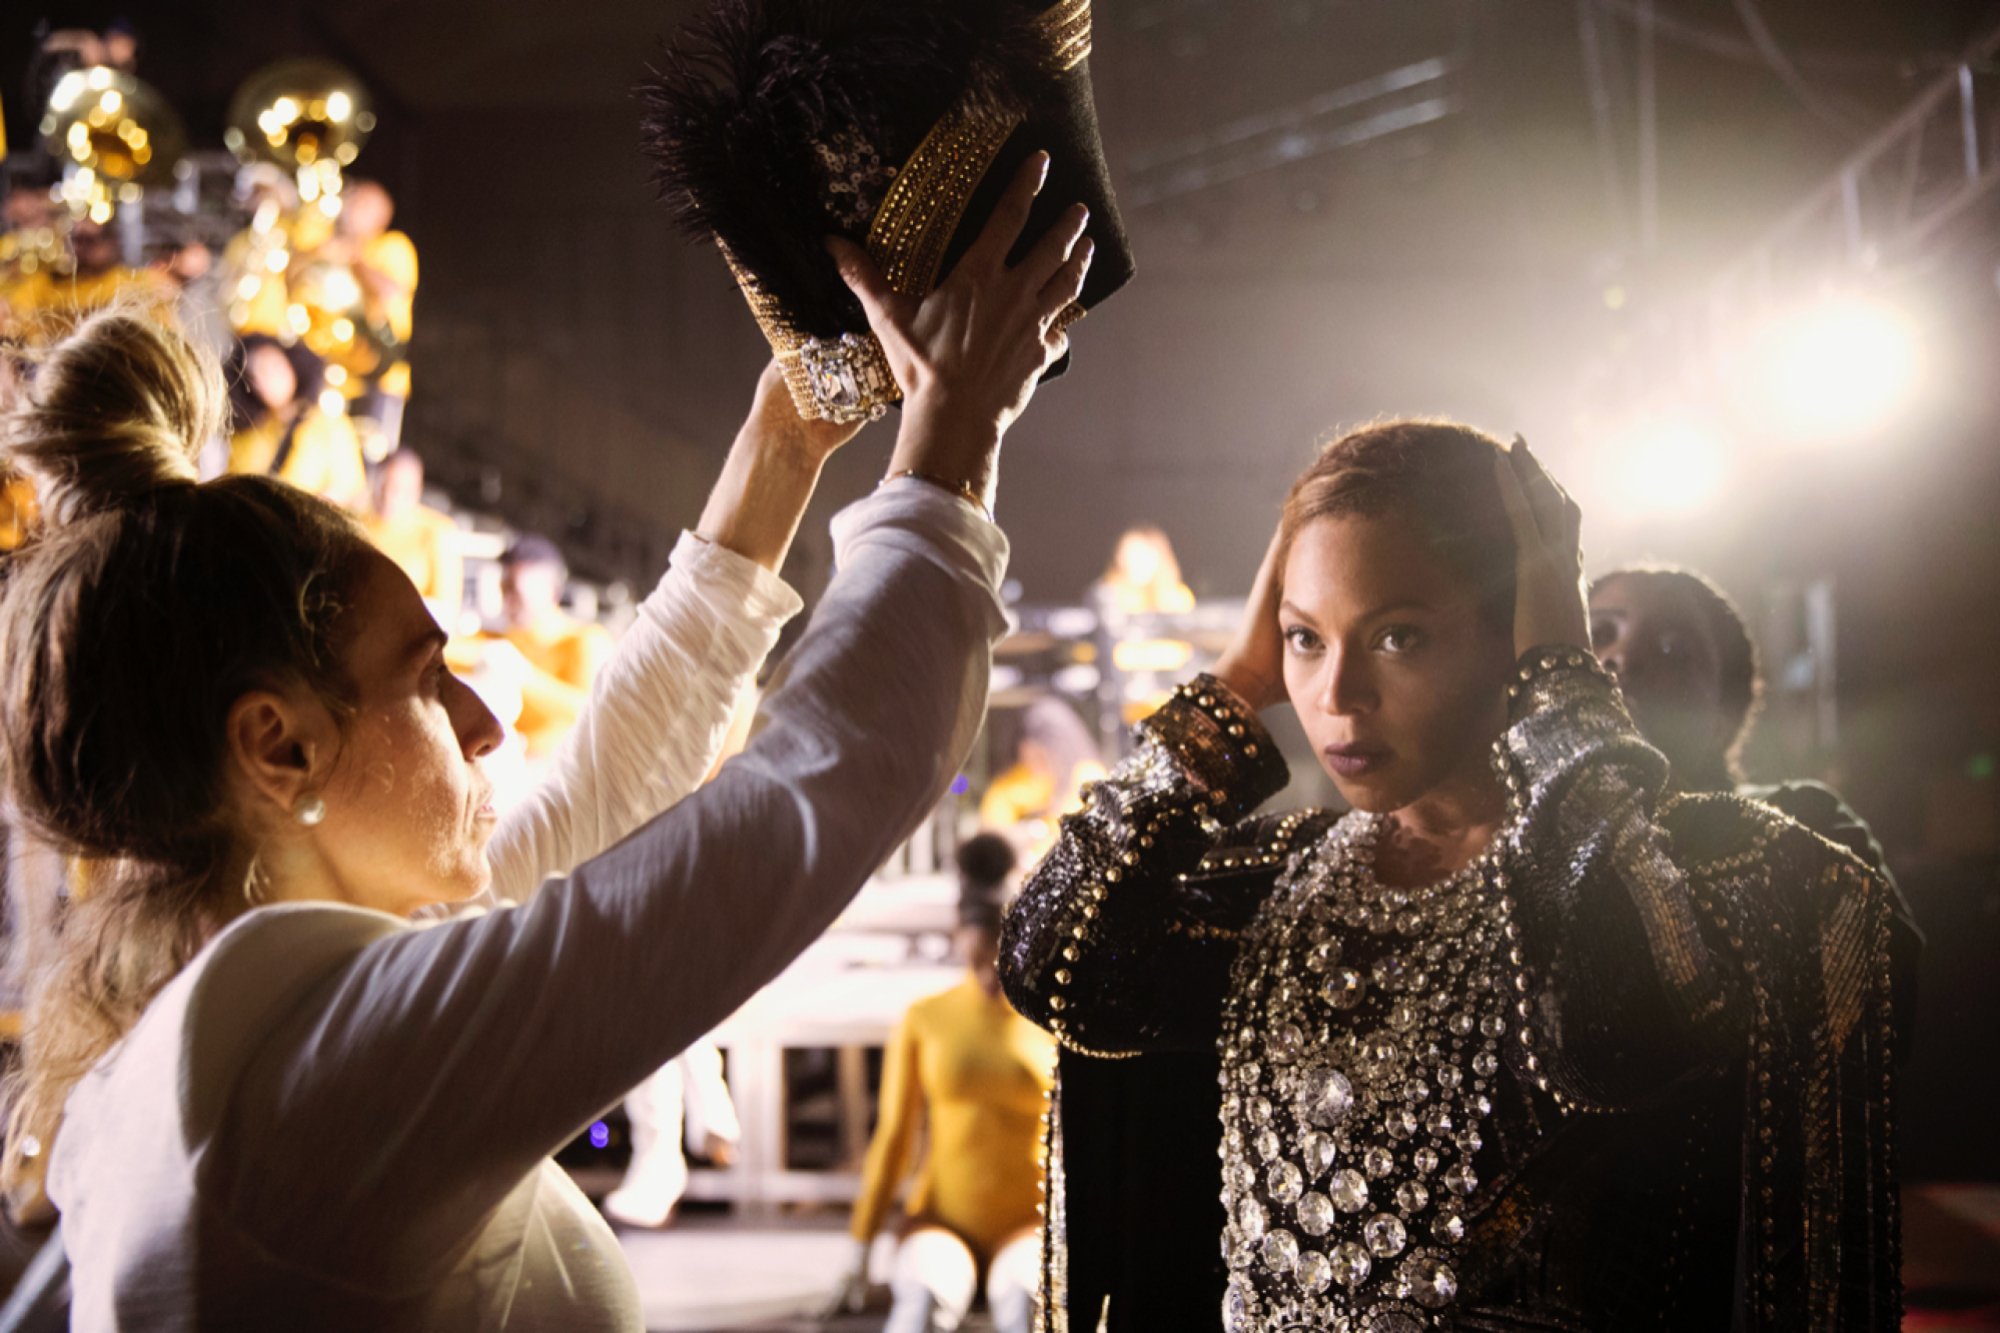 Beyoncé getting ready backstage, adjusting her hair as an assistant offers her a headpiece.